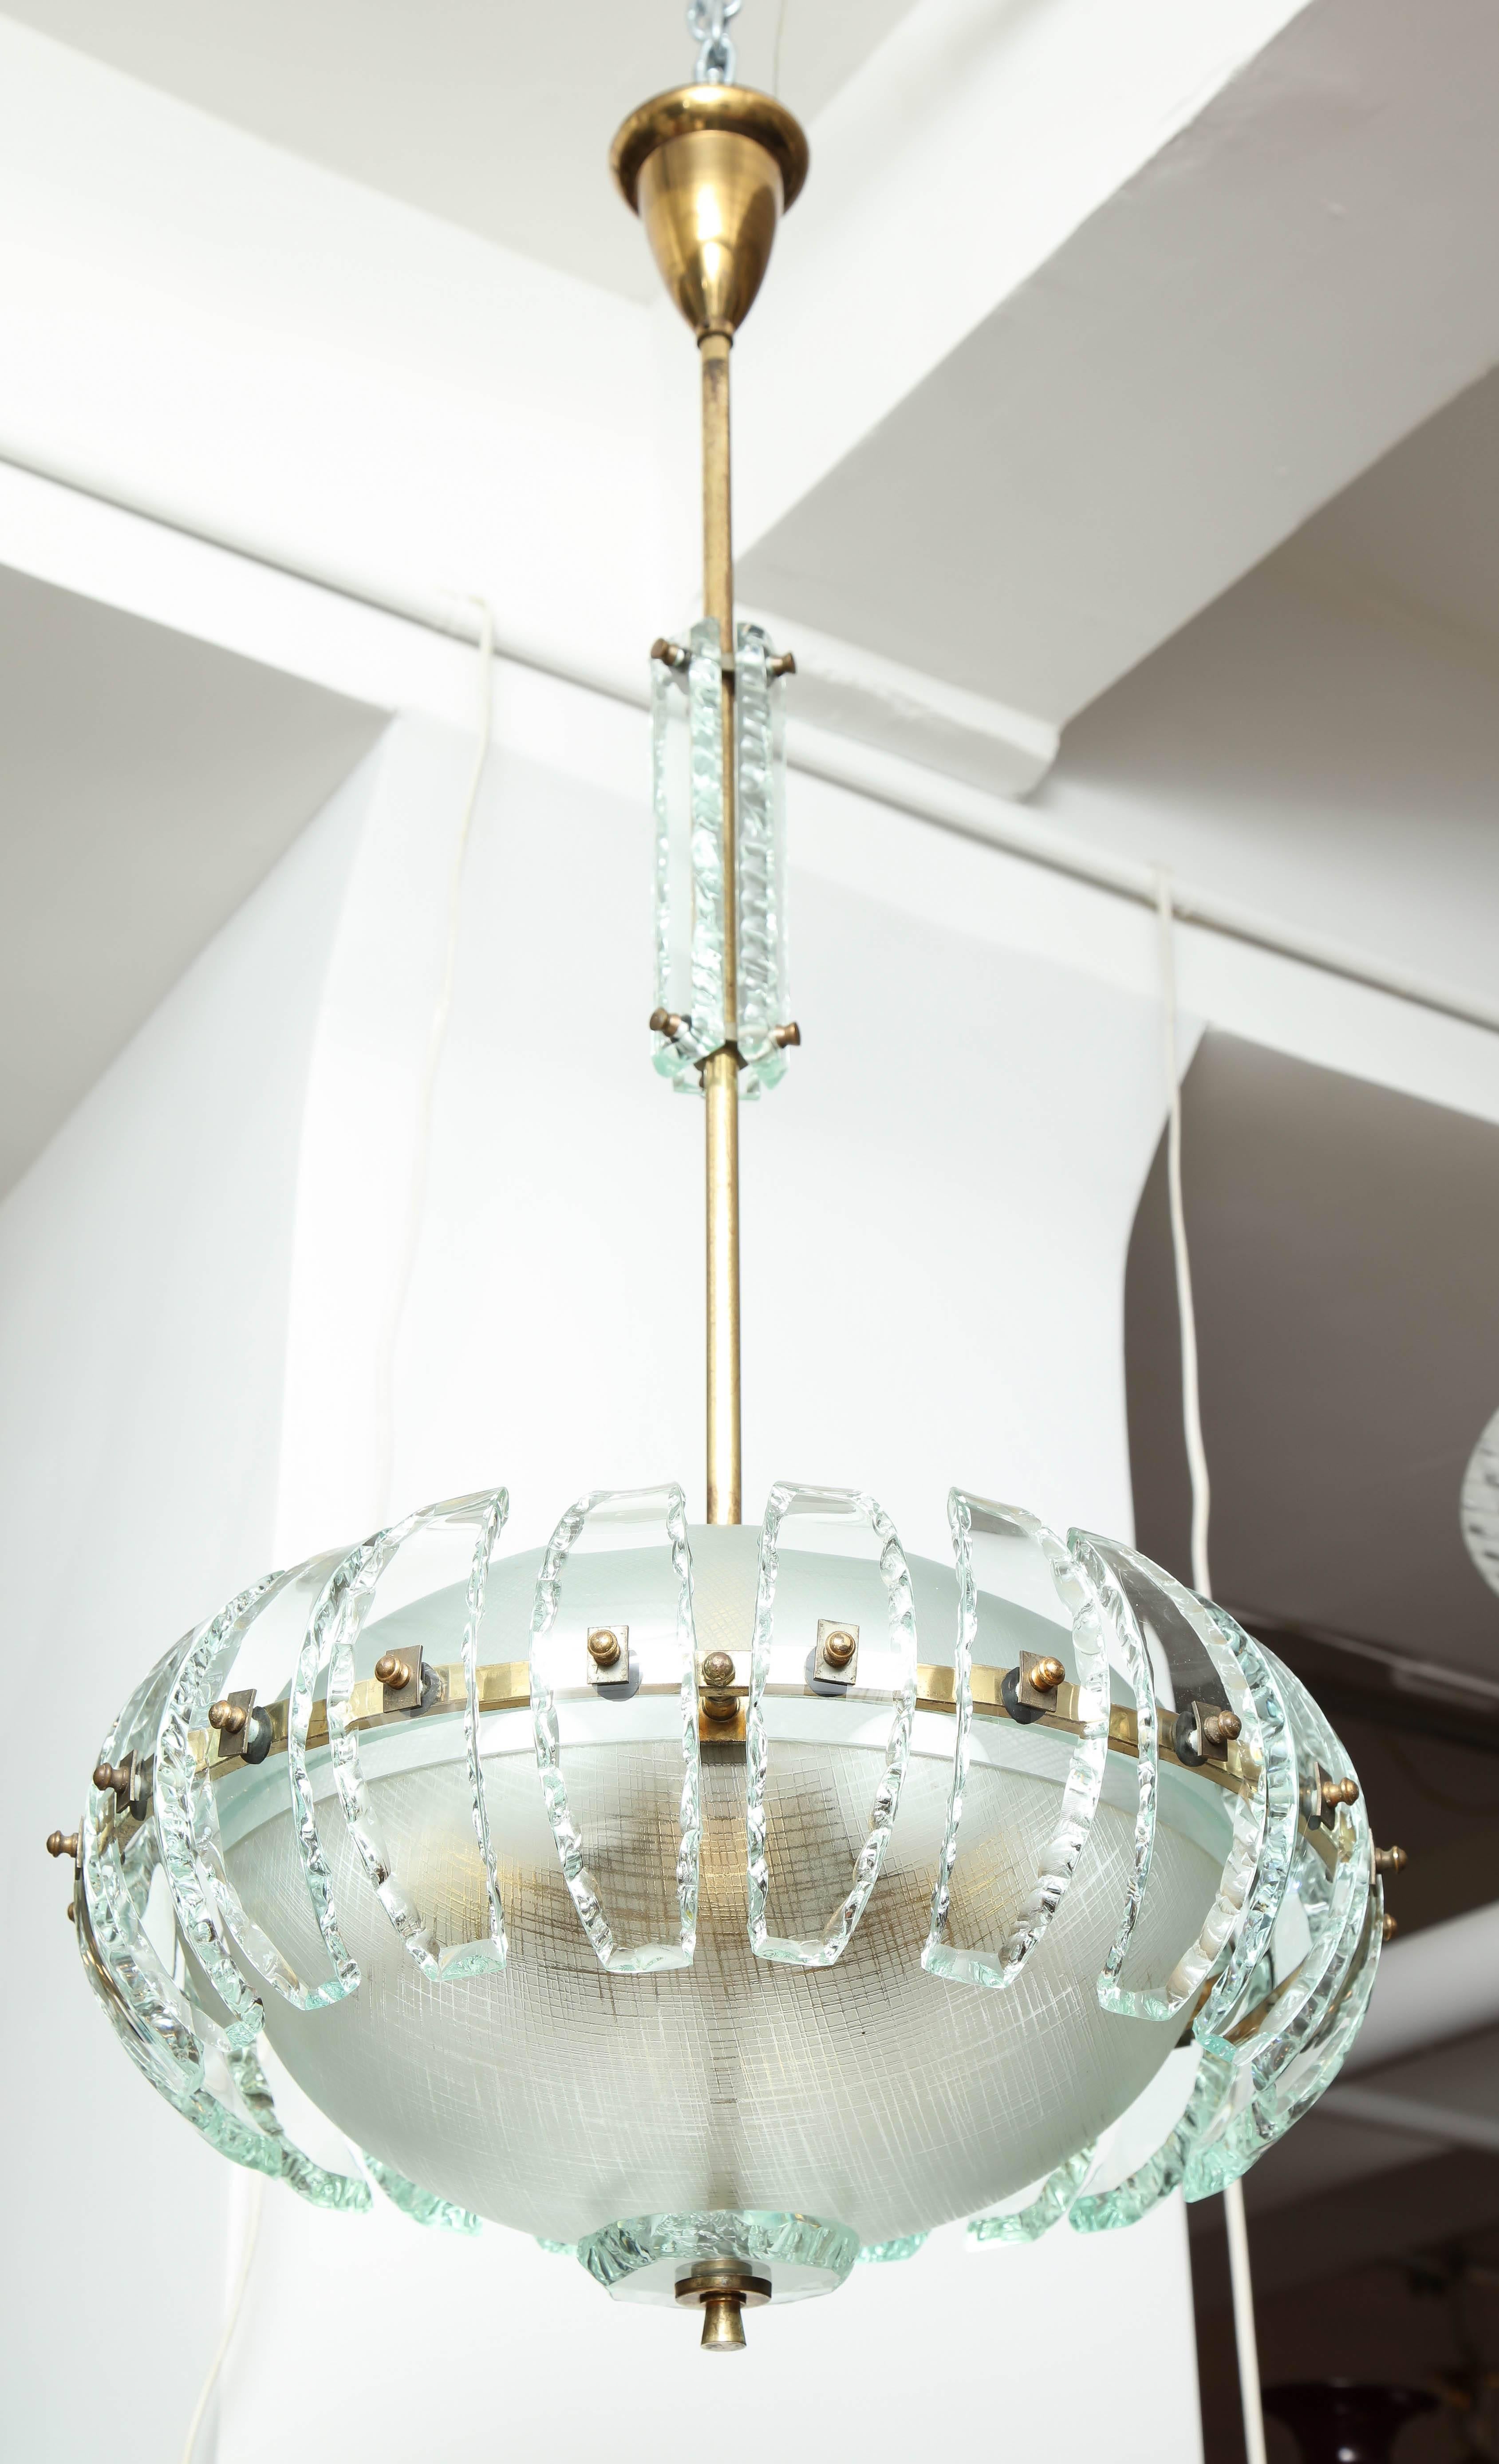 Crystal Arte pendant / chandelier made in Italy, 1955, exciting design, fixture having two half round acid etched lines criss crossing each other shades with 21 pieces of curved chipped glass hugging the sides of the fixture, chipped glass panels on